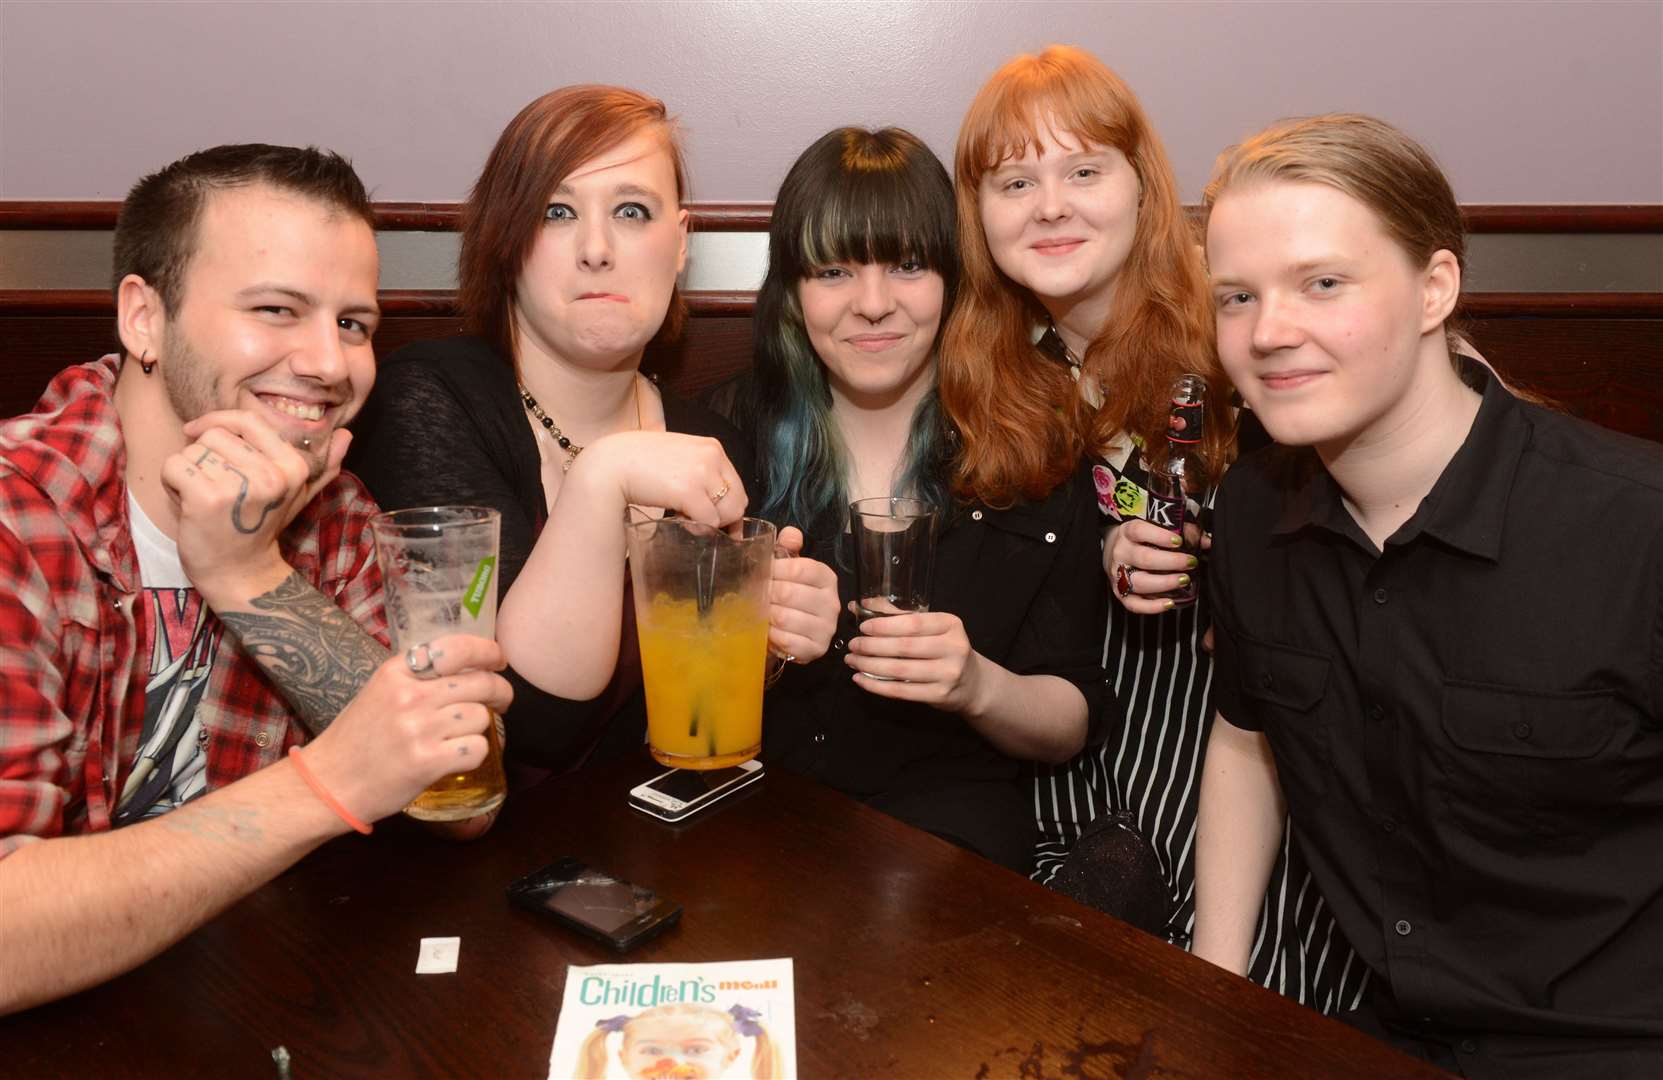 City Seen 2014-05-03..Craig Ross, Annie MacPherson, Samm Johnson (correct), Cassandra McArdle and Callum Davies, friends from around Inverness and Dingwall getting their evening off to a good start in Wetherspoons..Pictures: Andrew Smith.Image No: 025548.